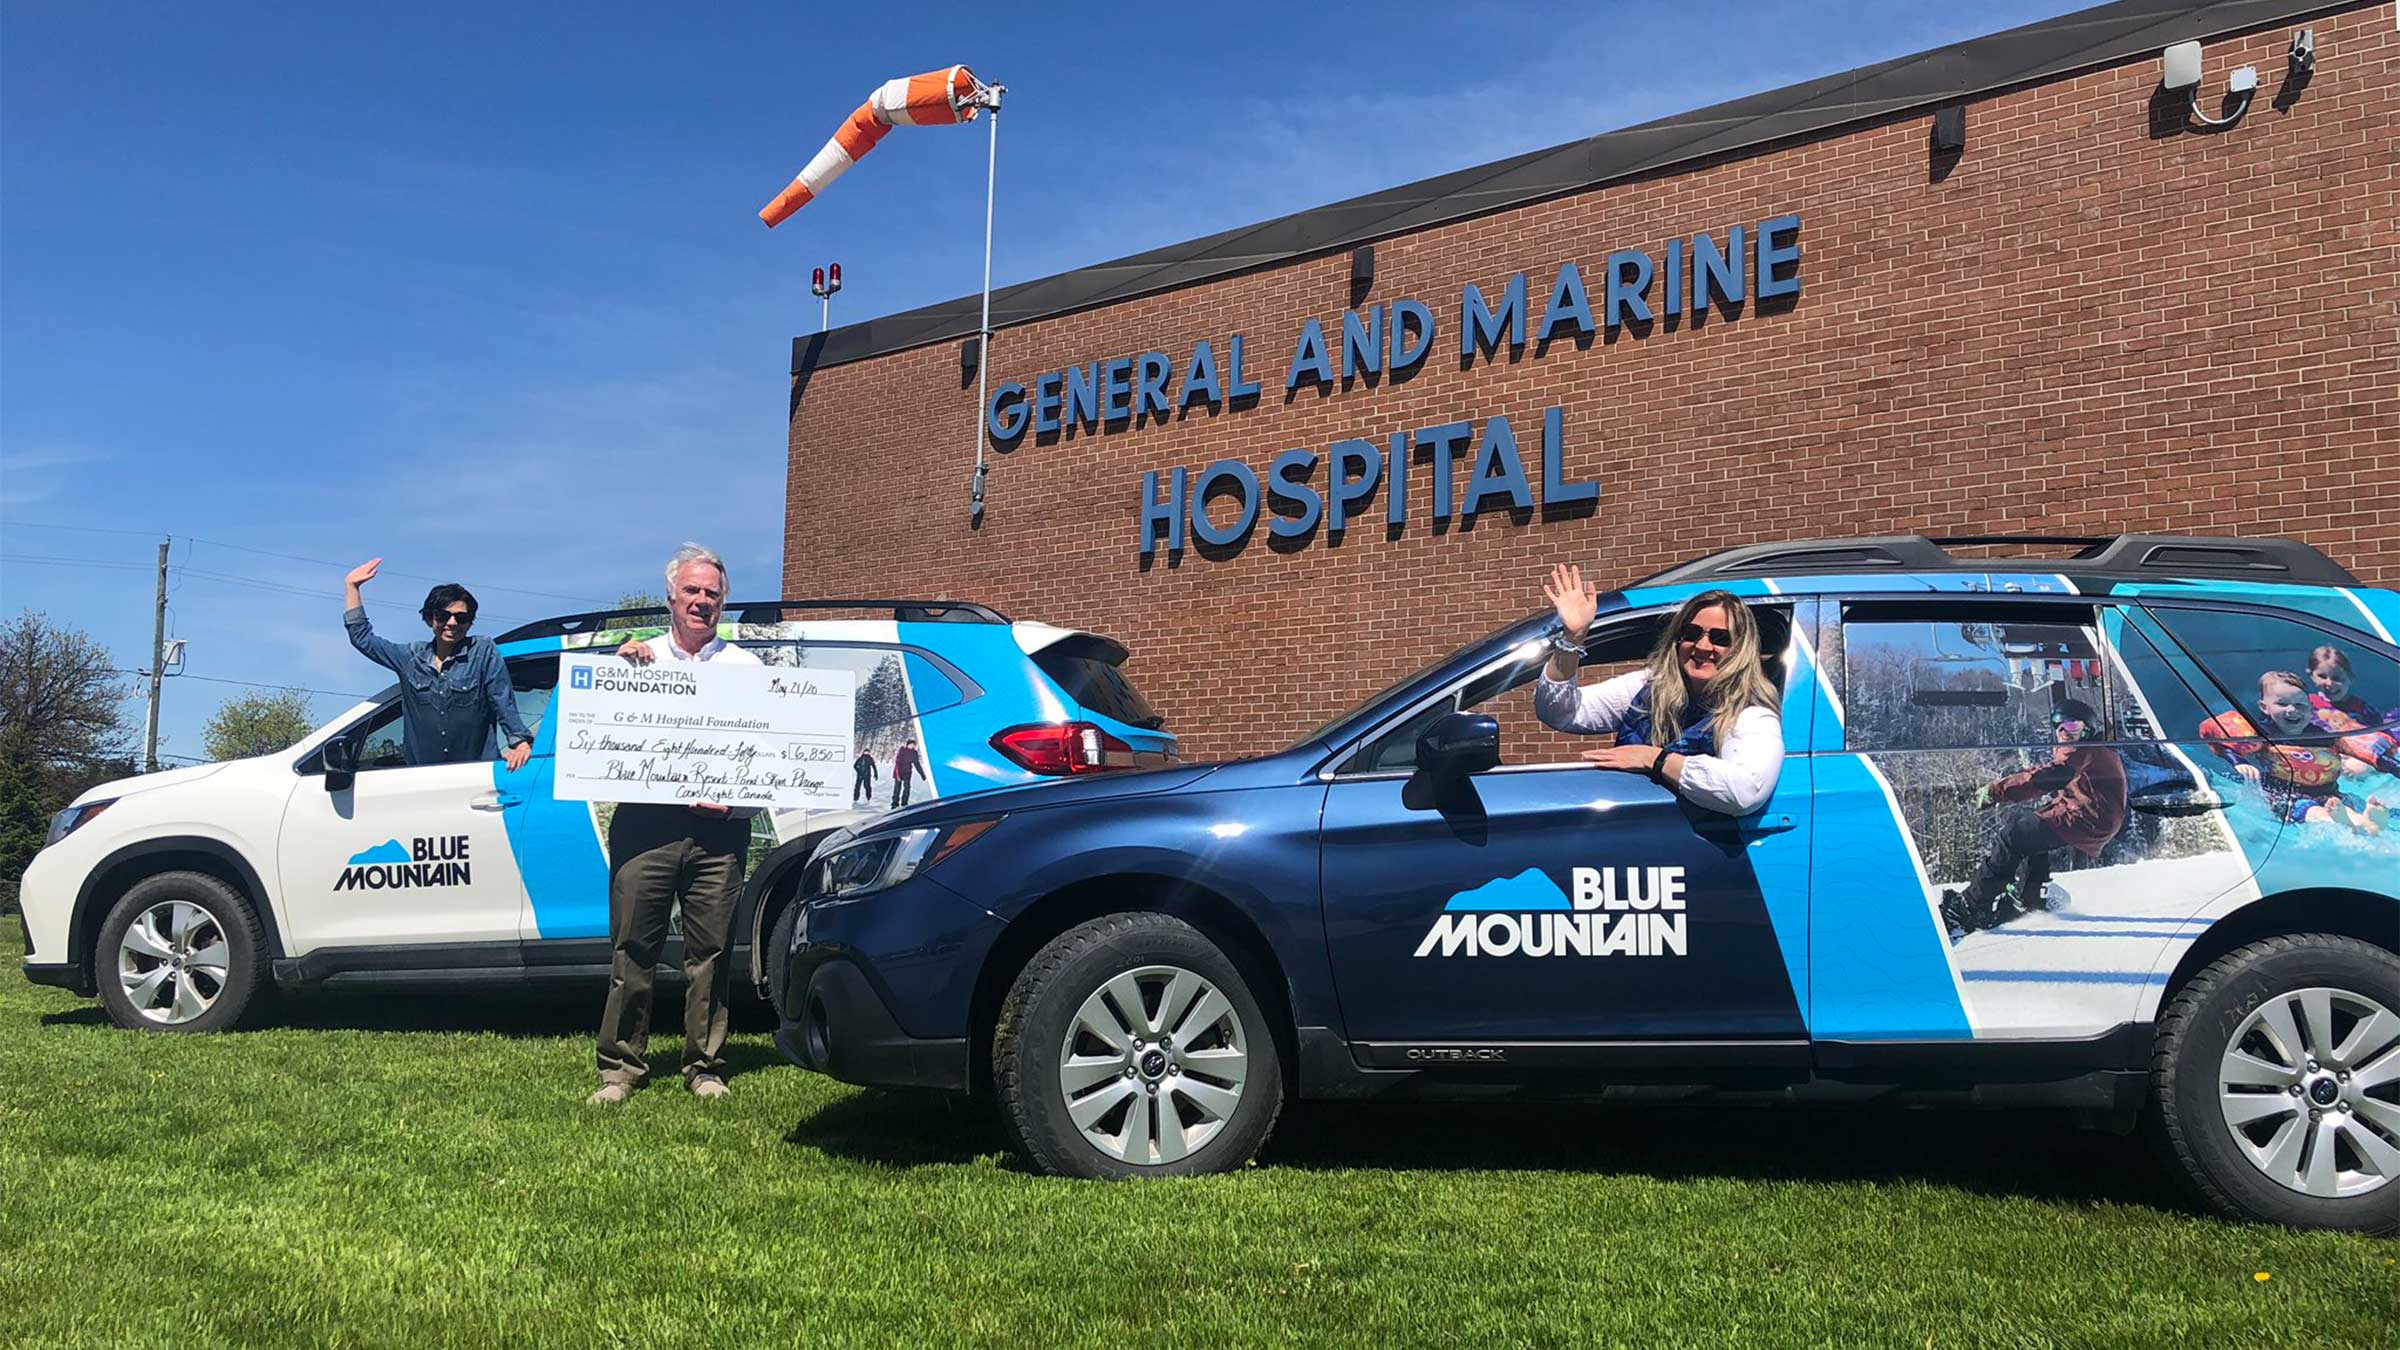 Cheque Presentation at Collingwood General and Marine Hospital